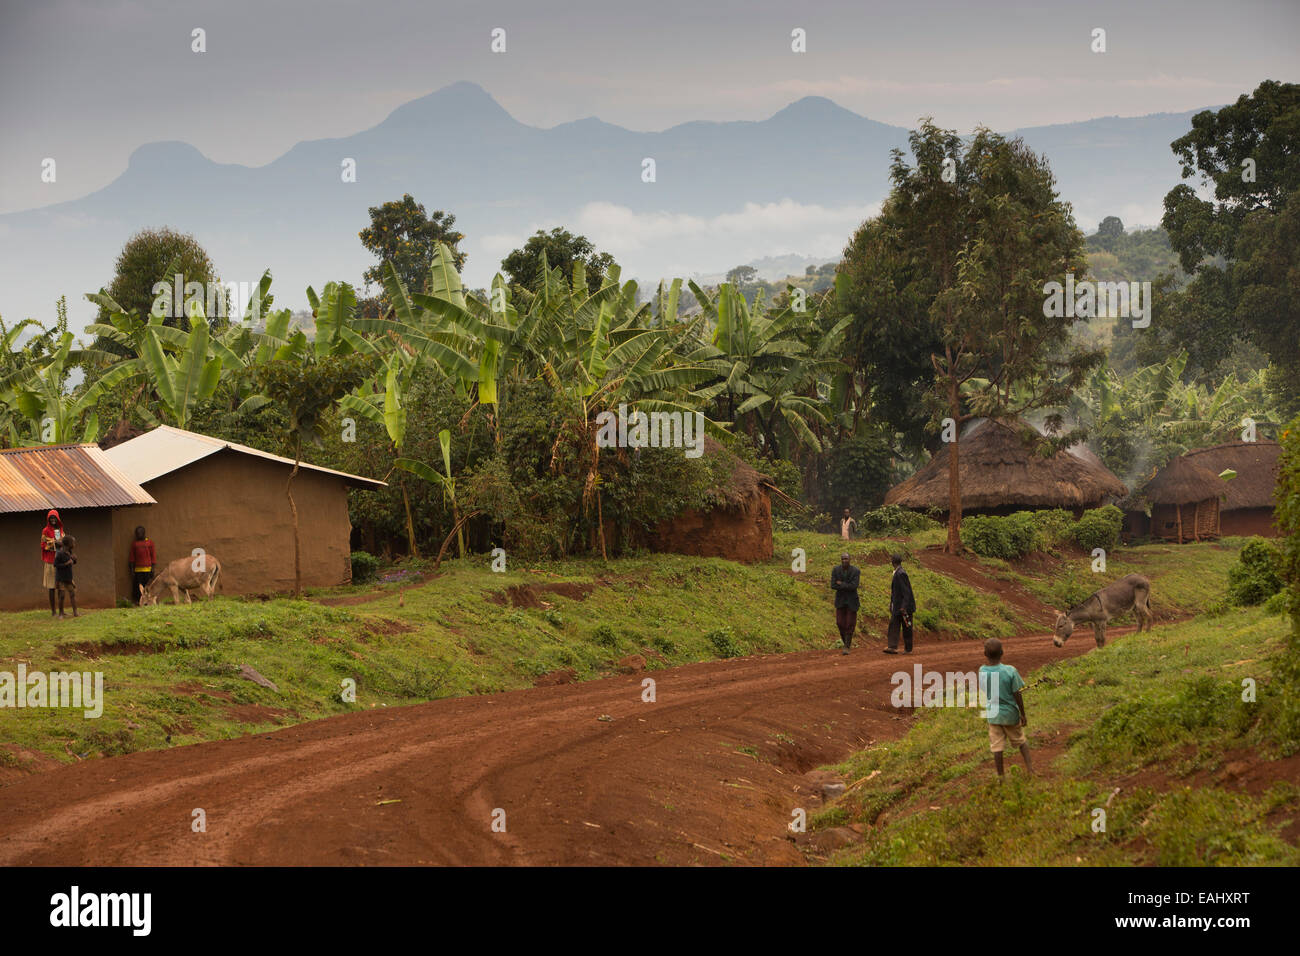 Bukwo District, Uganda is located on the eastern foothills of Mount Elgon. Stock Photo